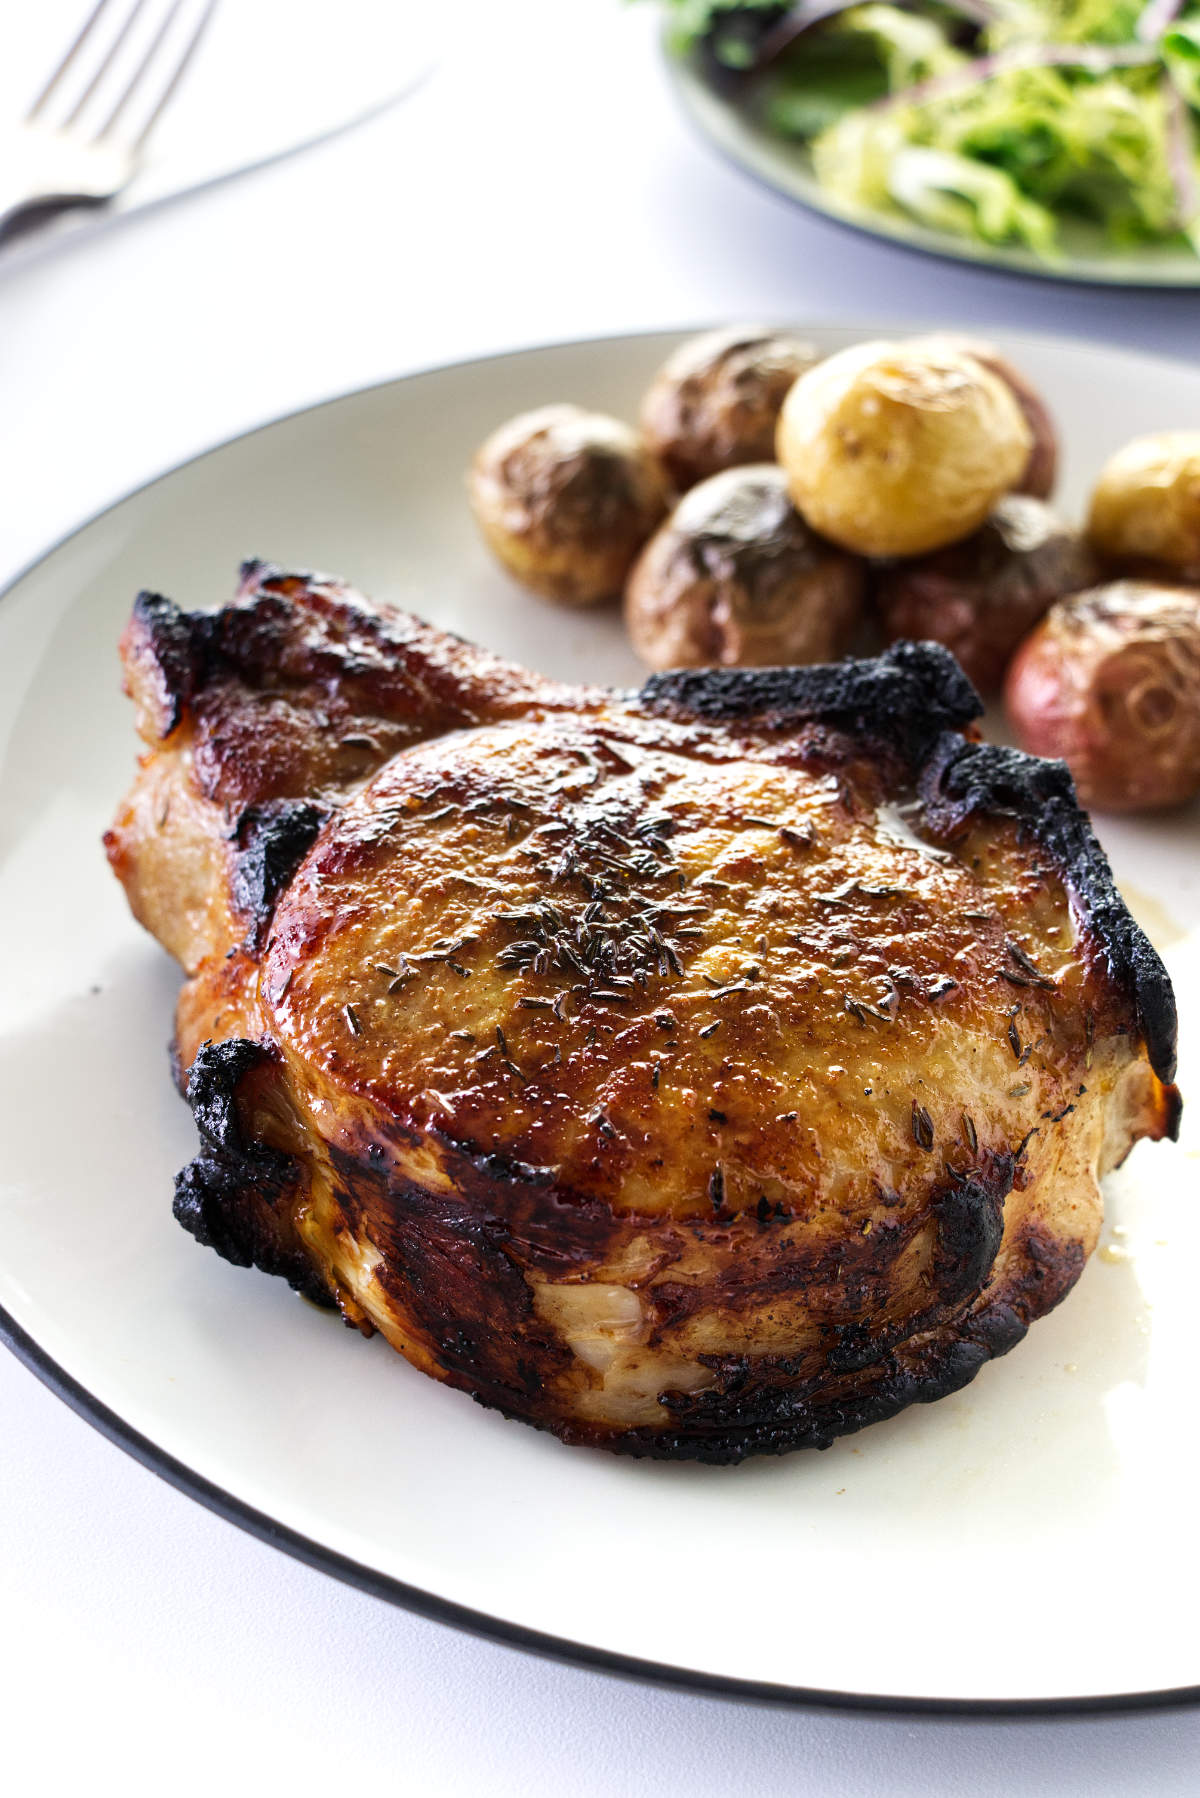 A thick broiled pork chop on a plate with roasted potatoes, green salad in the background